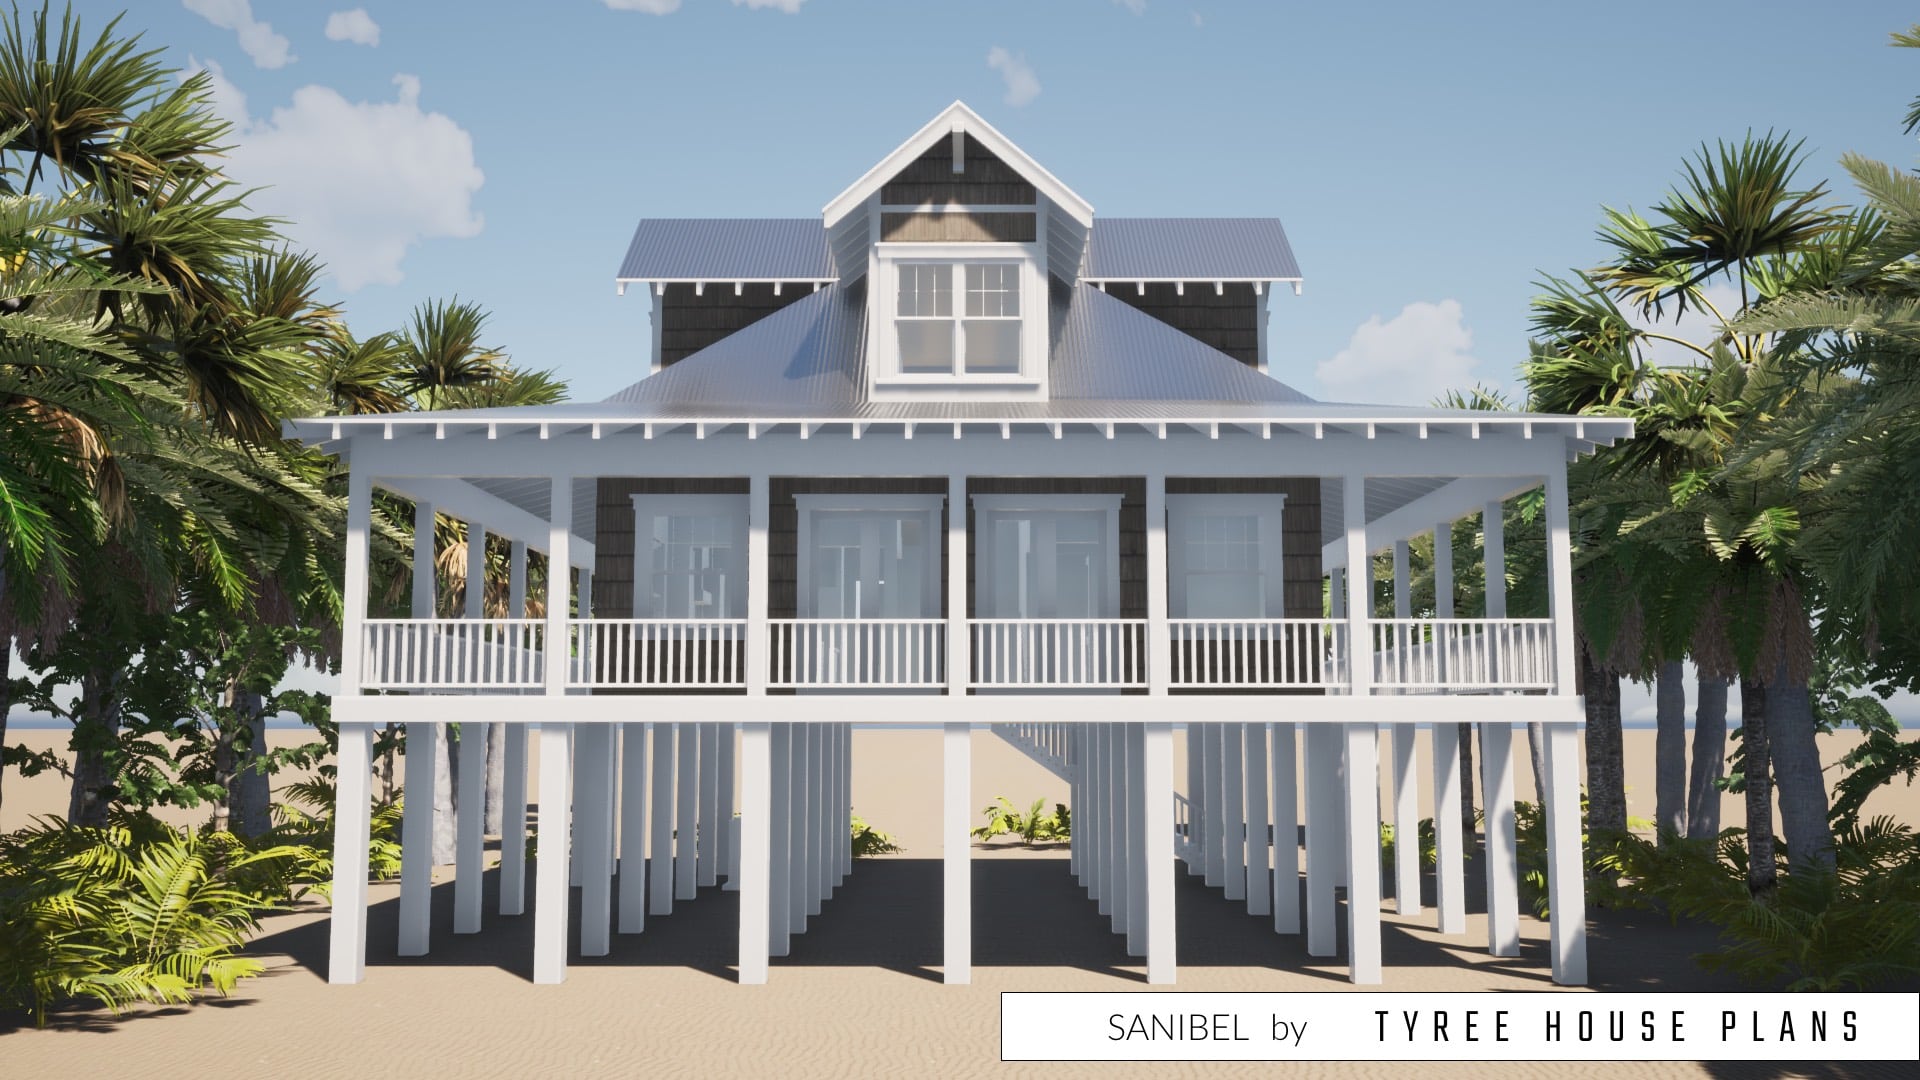 Sanibel House Plan by Tyree House Plans